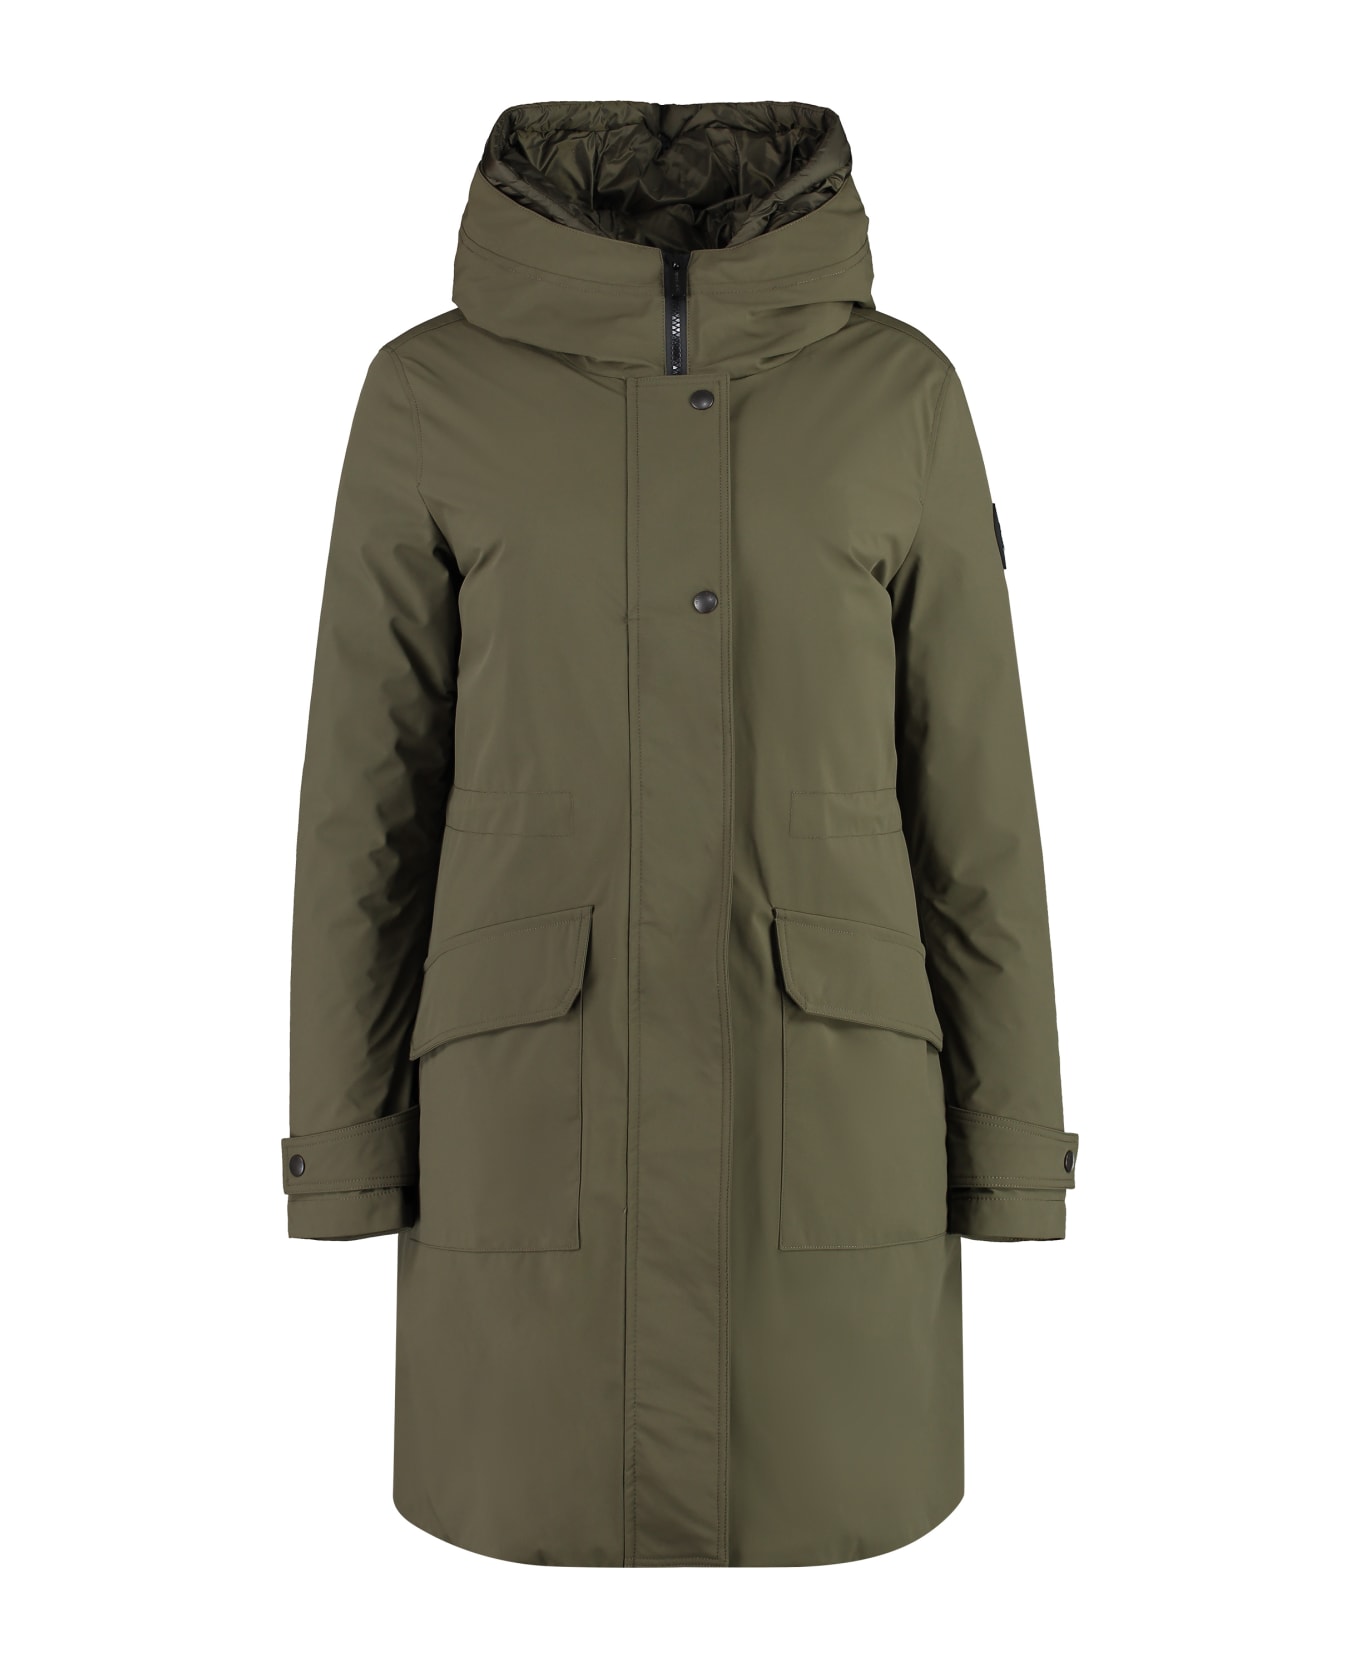 Woolrich Military Technical Fabric Parka With Internal Removable Down Jacket - green コート